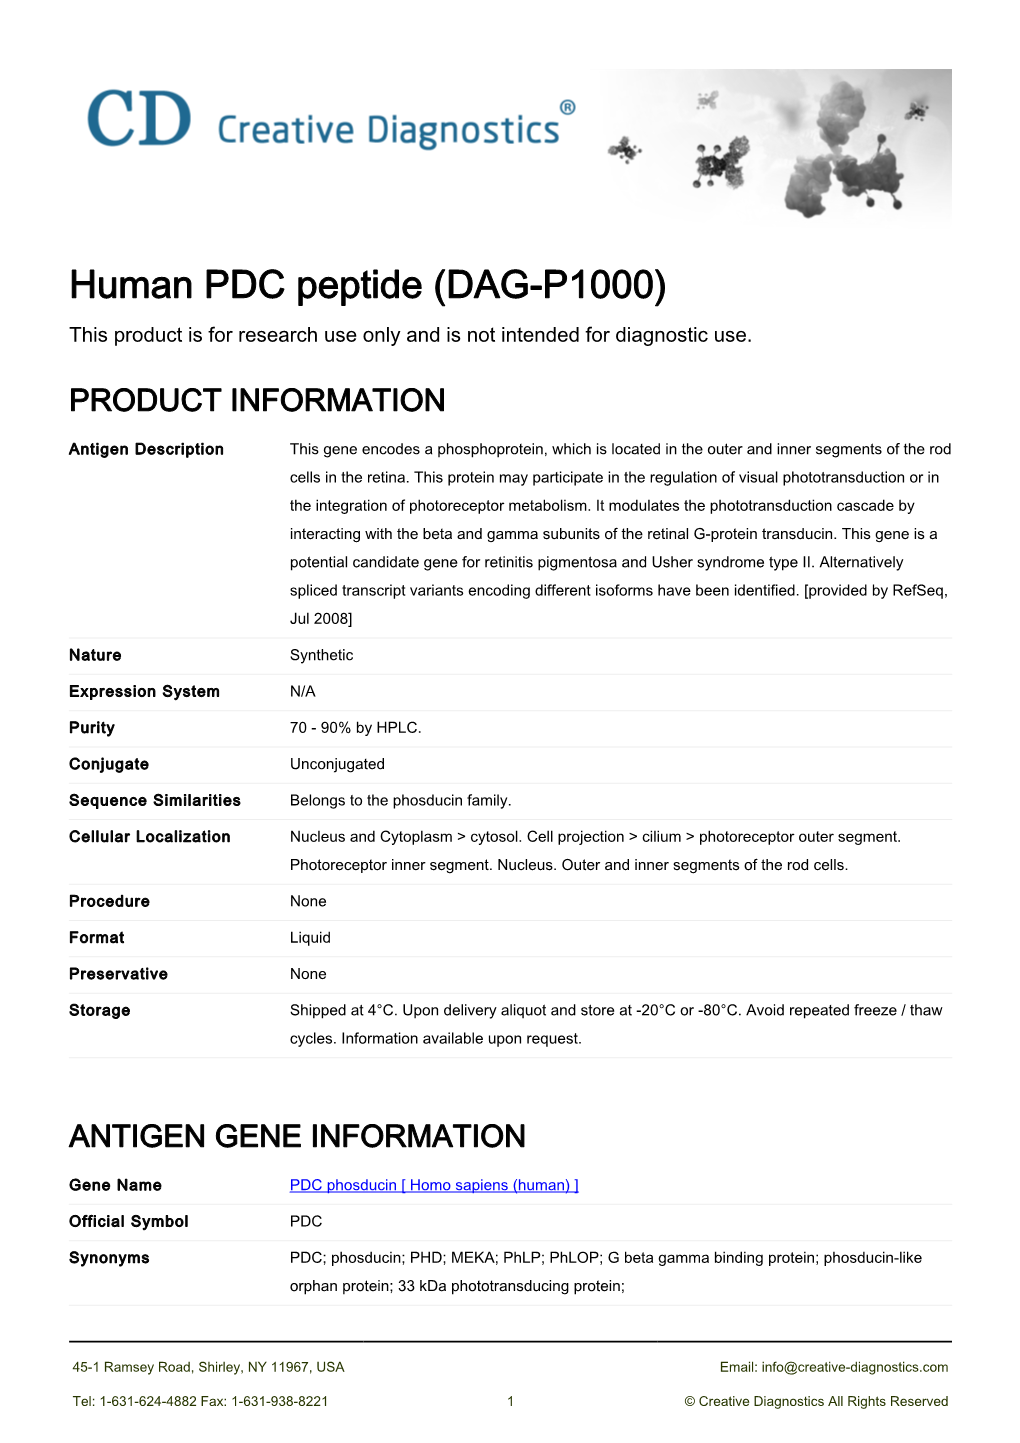 Human PDC Peptide (DAG-P1000) This Product Is for Research Use Only and Is Not Intended for Diagnostic Use